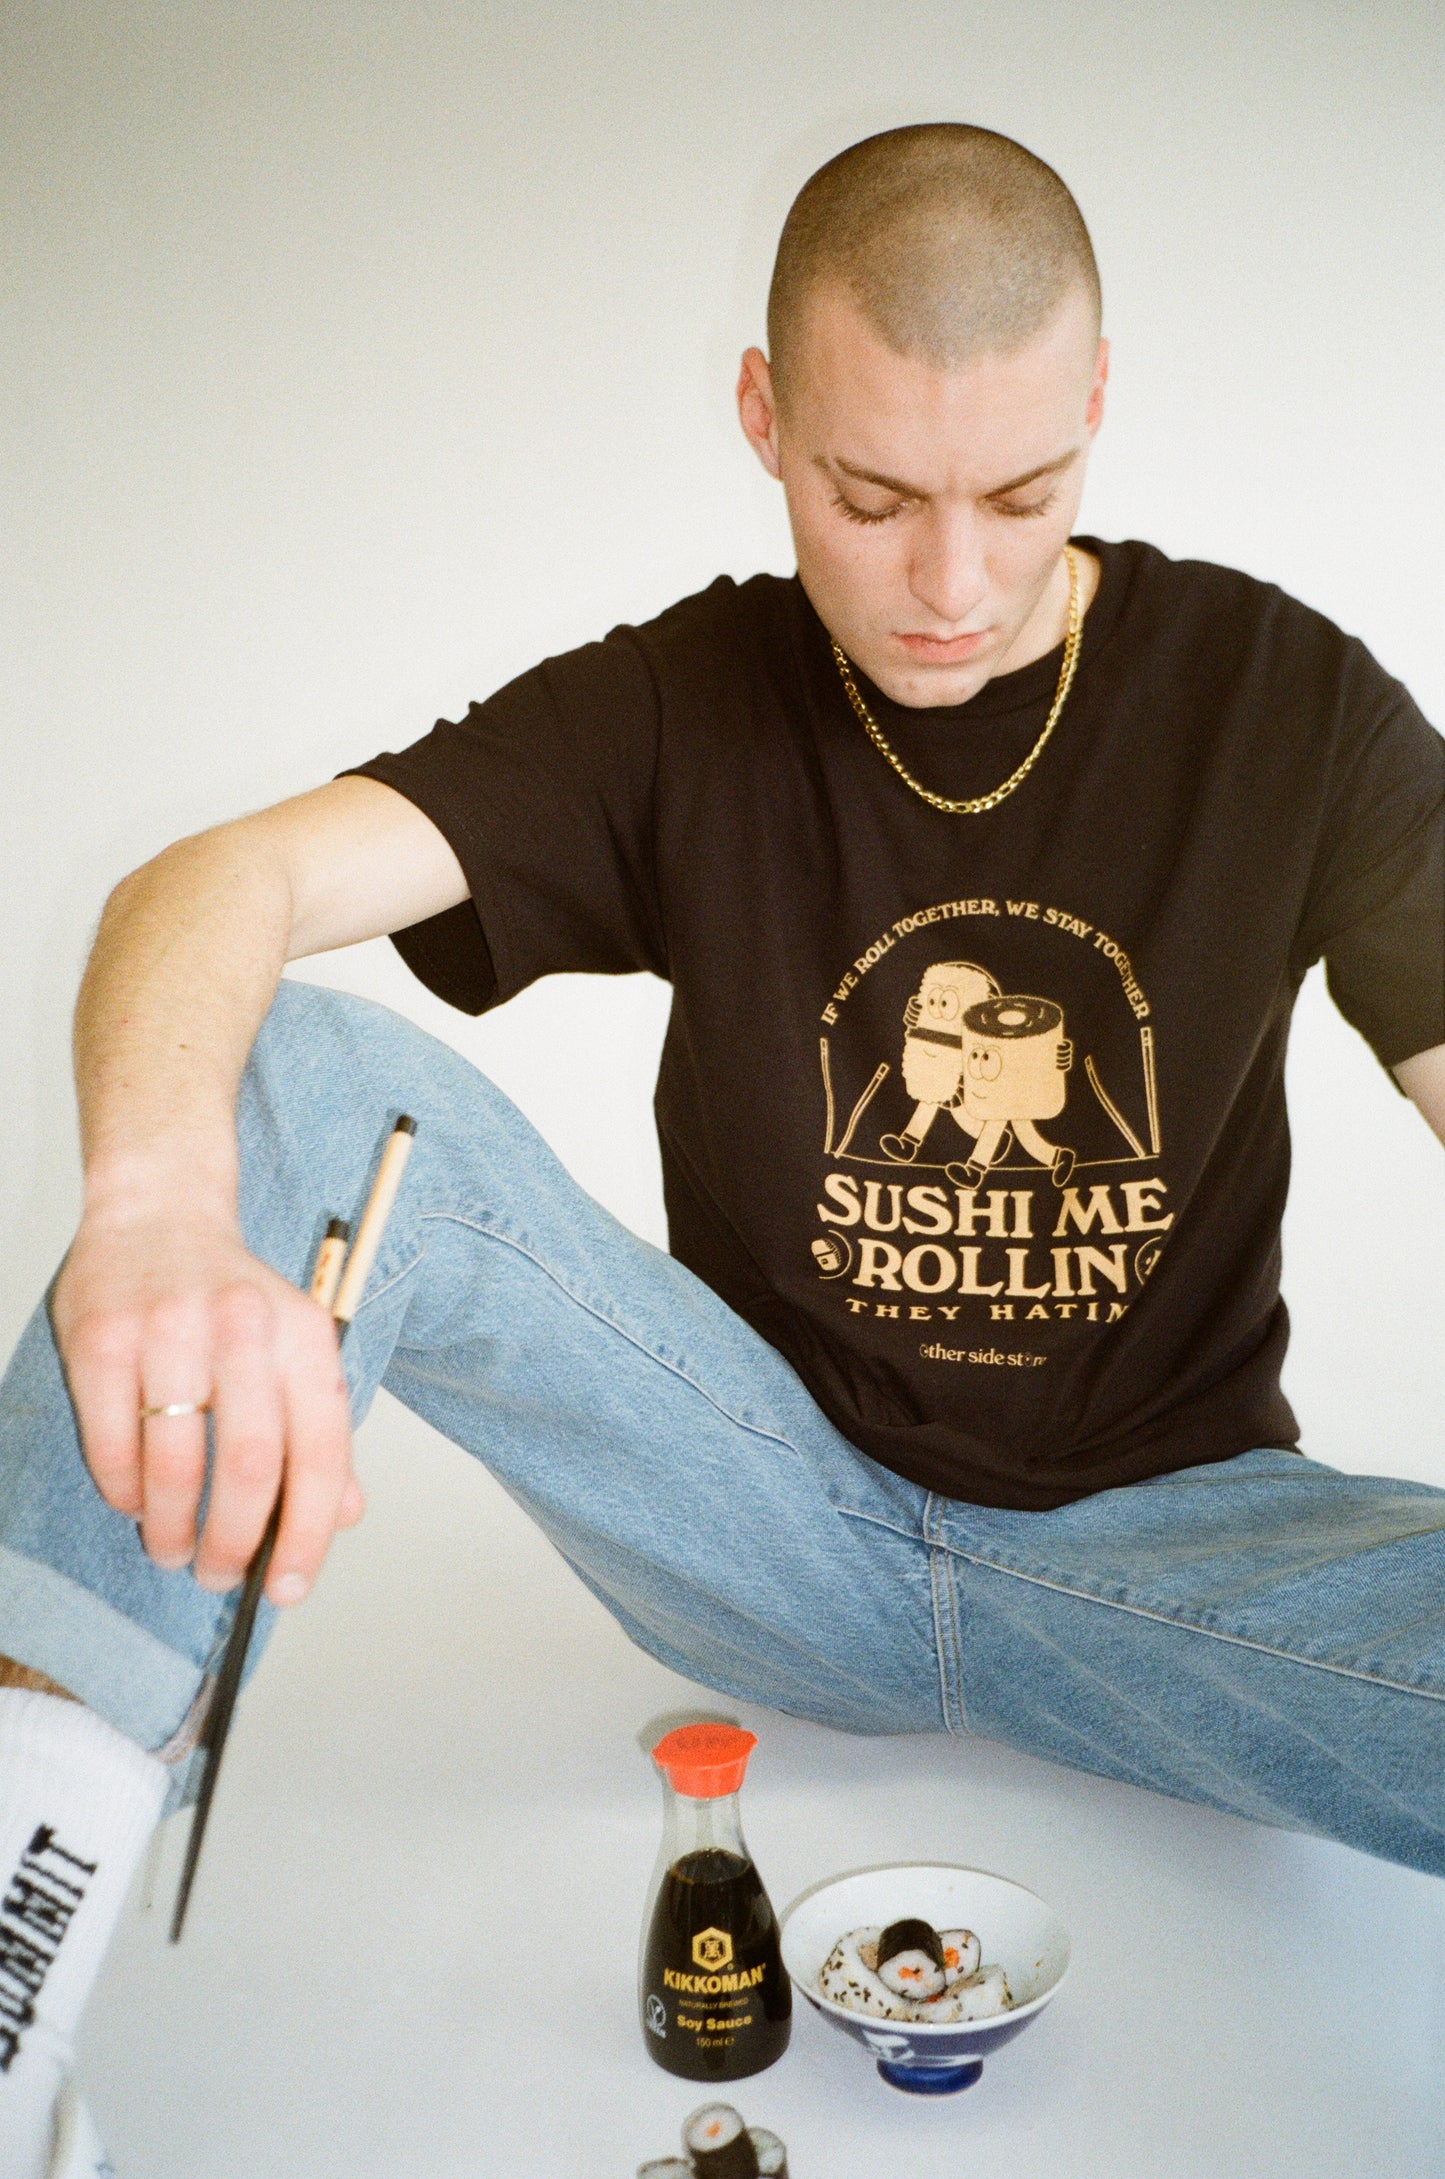 Other Side Store 'Sushi Me Rollin' Tee